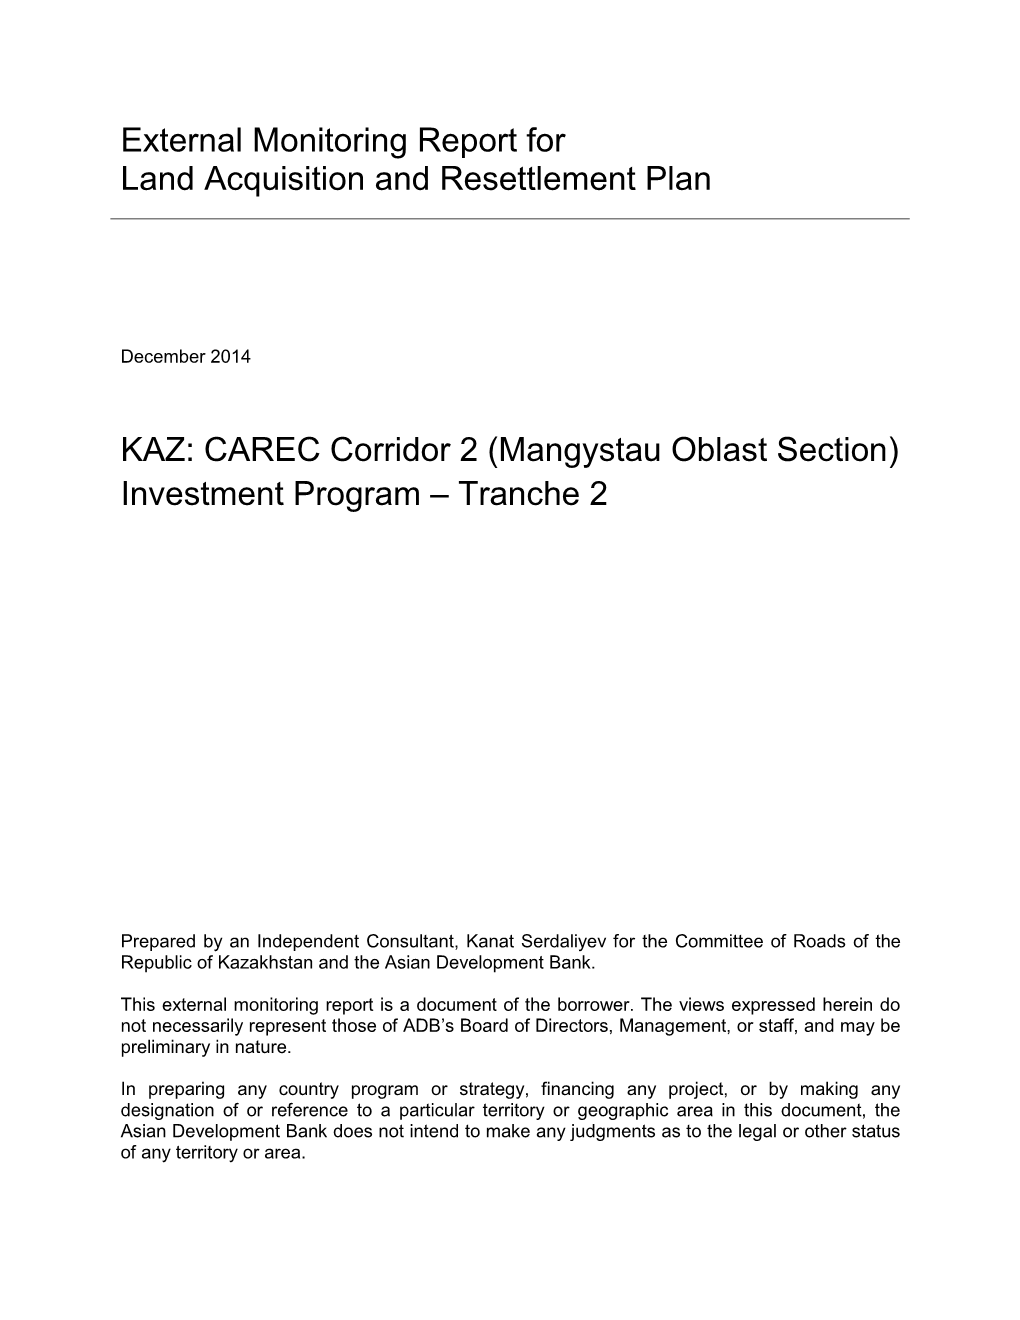 External Monitoring Report for Land Acquisition and Resettlement Plan